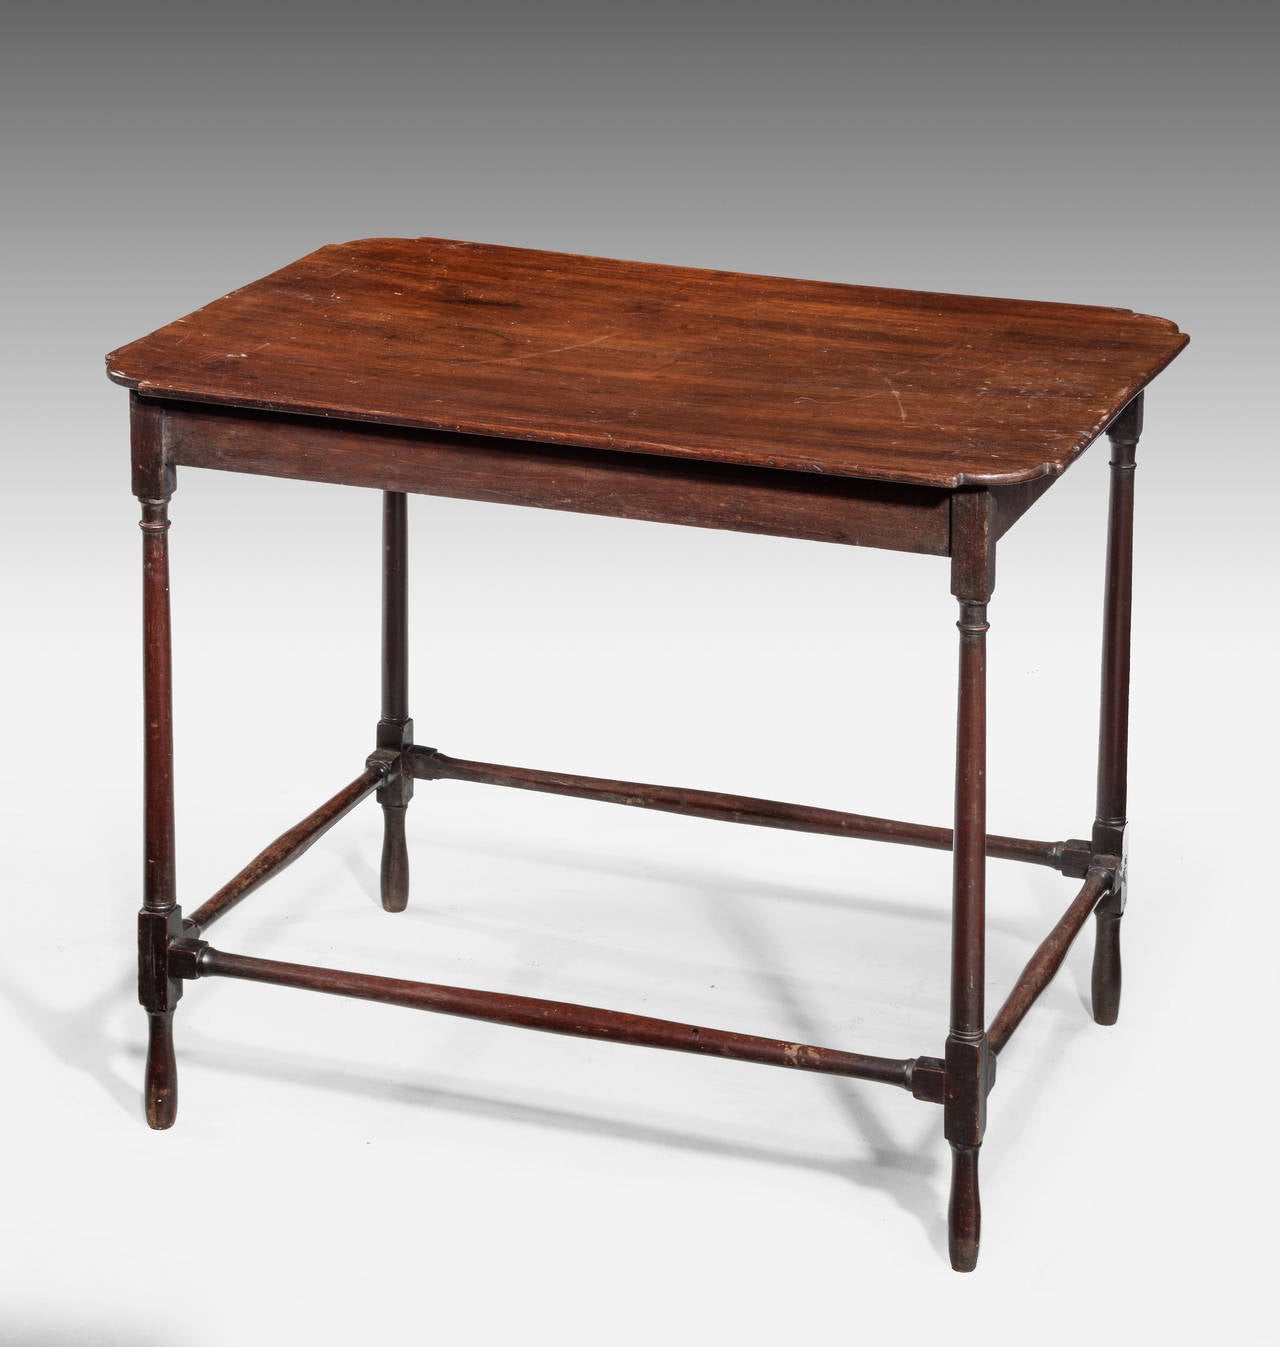 An attractive Late 18th Century Mahogany Centre standing Occasional Table. The top with cusb and shaped corners. Finely turned supports with original cross stretchers to the base section.

RR